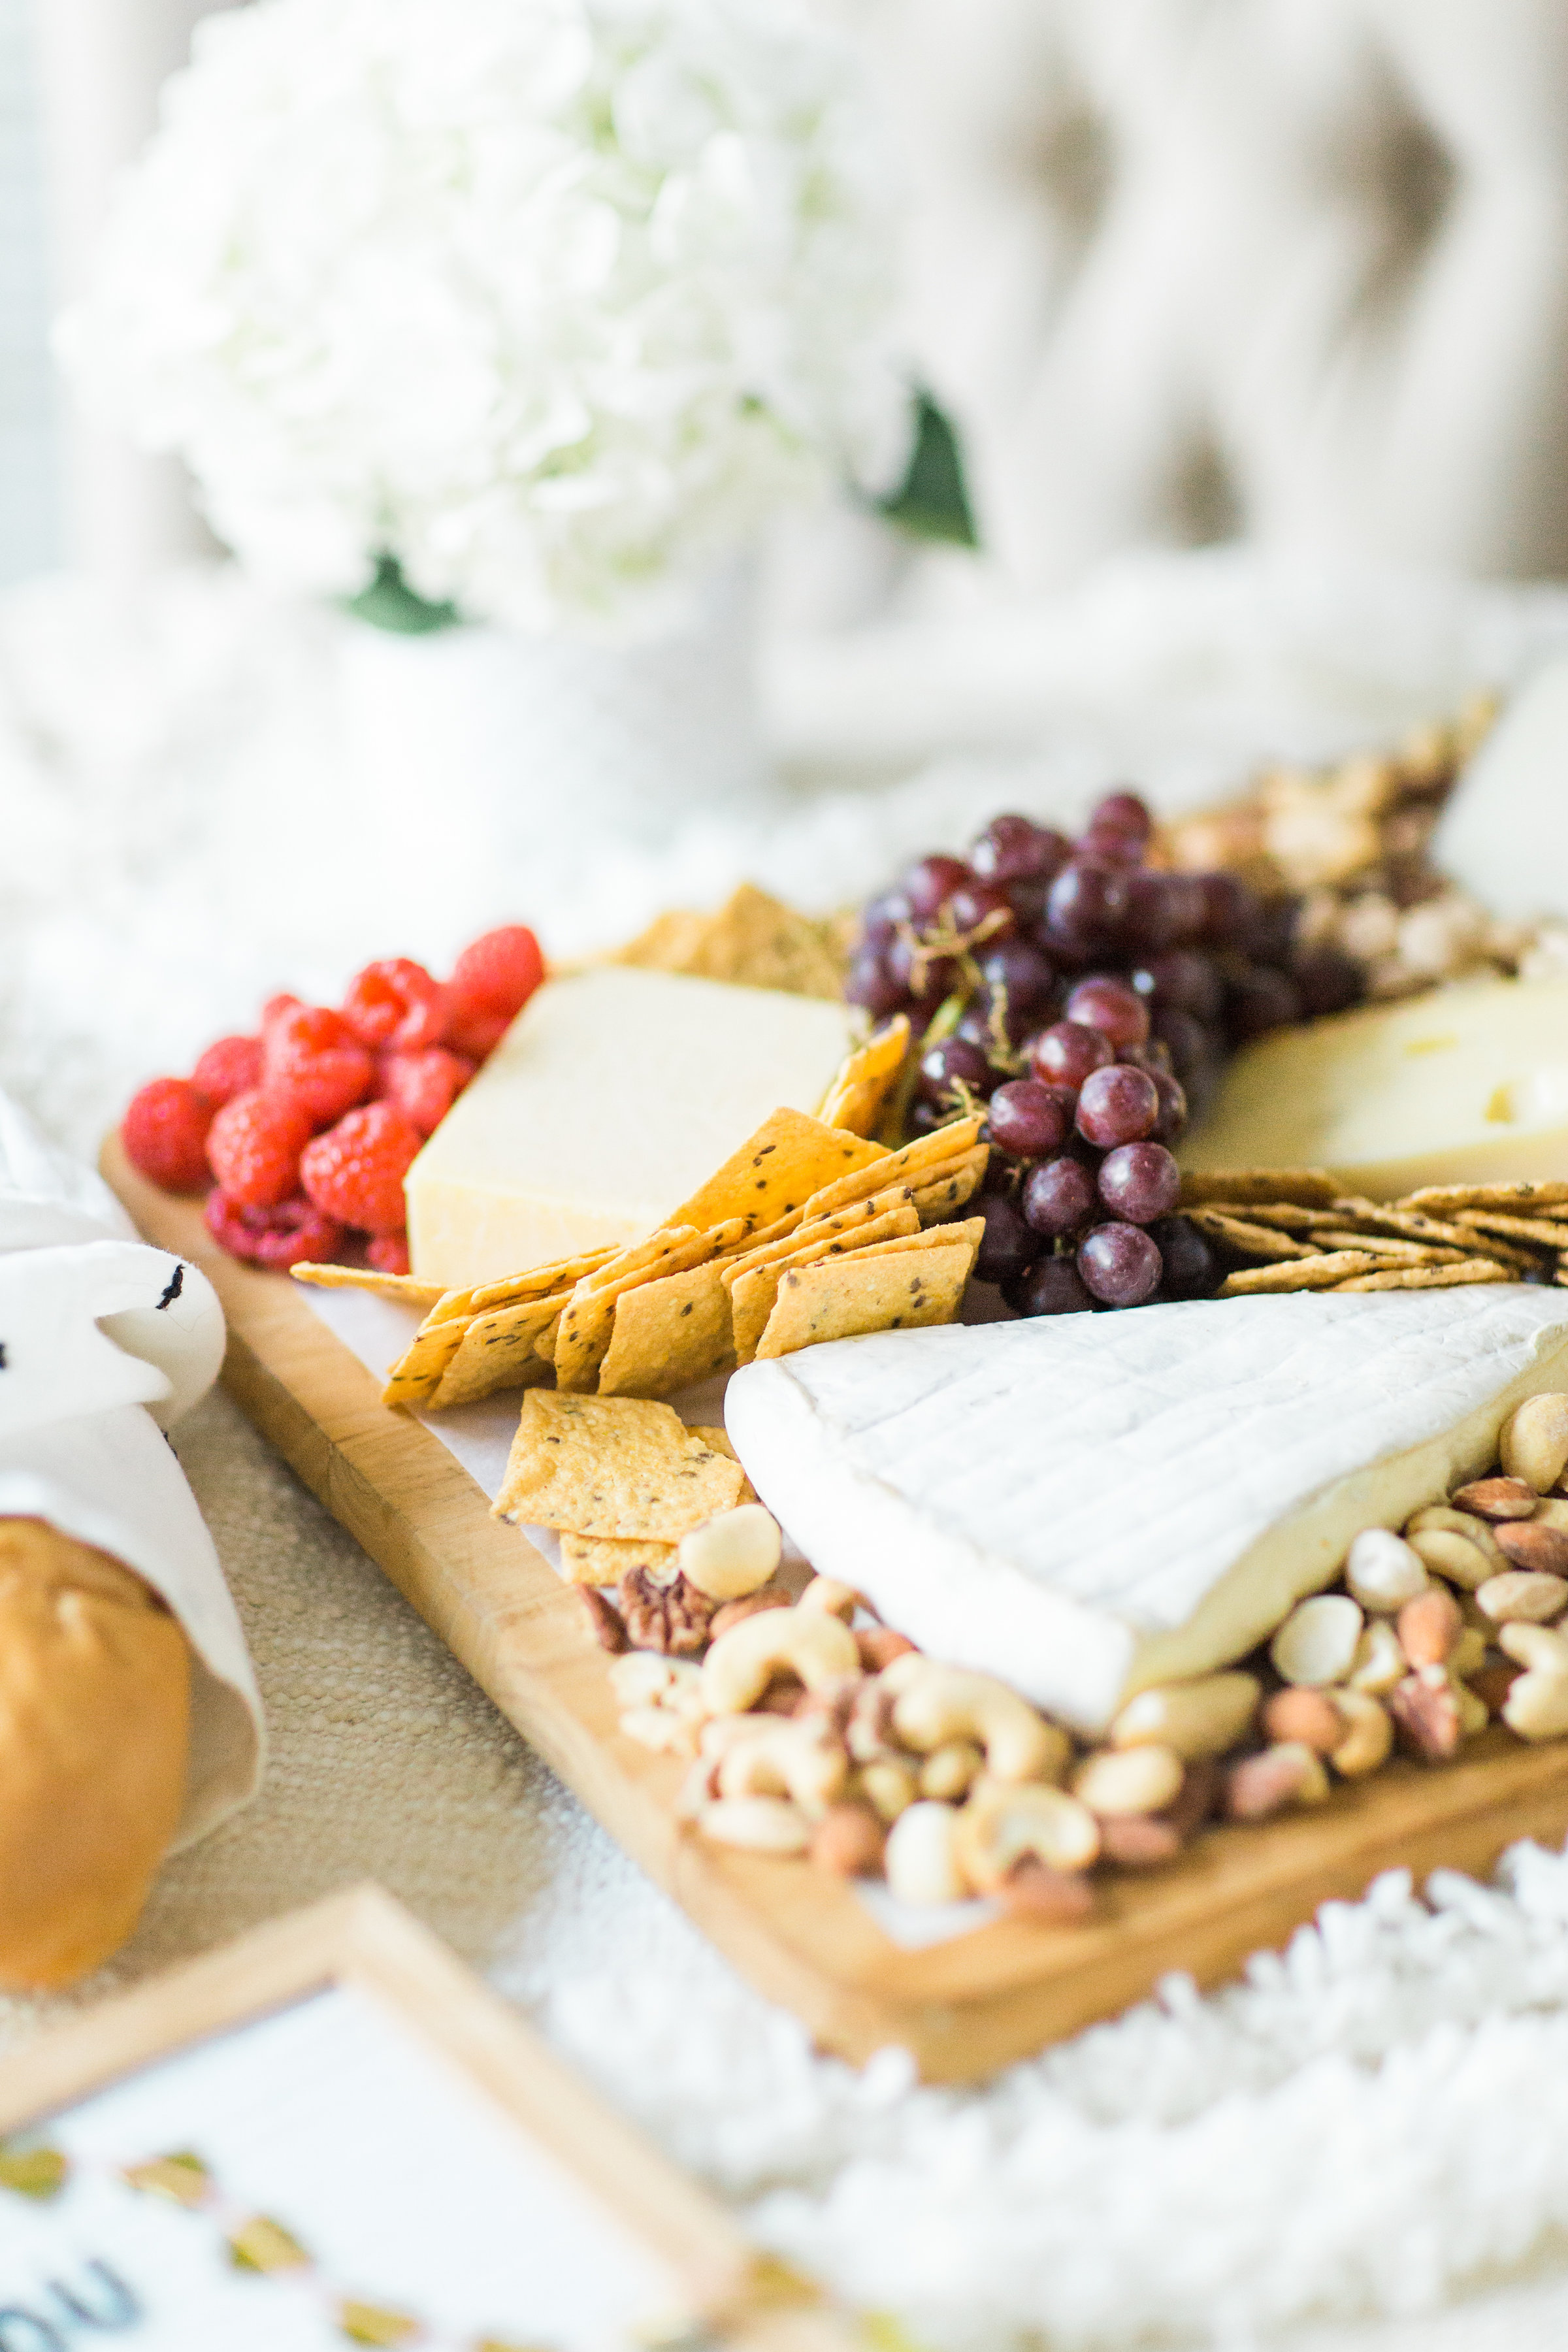 This year, celebrate Galentine's Day (and girl power) with wine and bubbly, cheese, and a whole lot of dessert. Here's how to throw one great party! | glitterinc.com | @glitterinc - Galentine's Day Wine and Cheese Party by North Carolina lifestyle blogger Glitter, Inc.